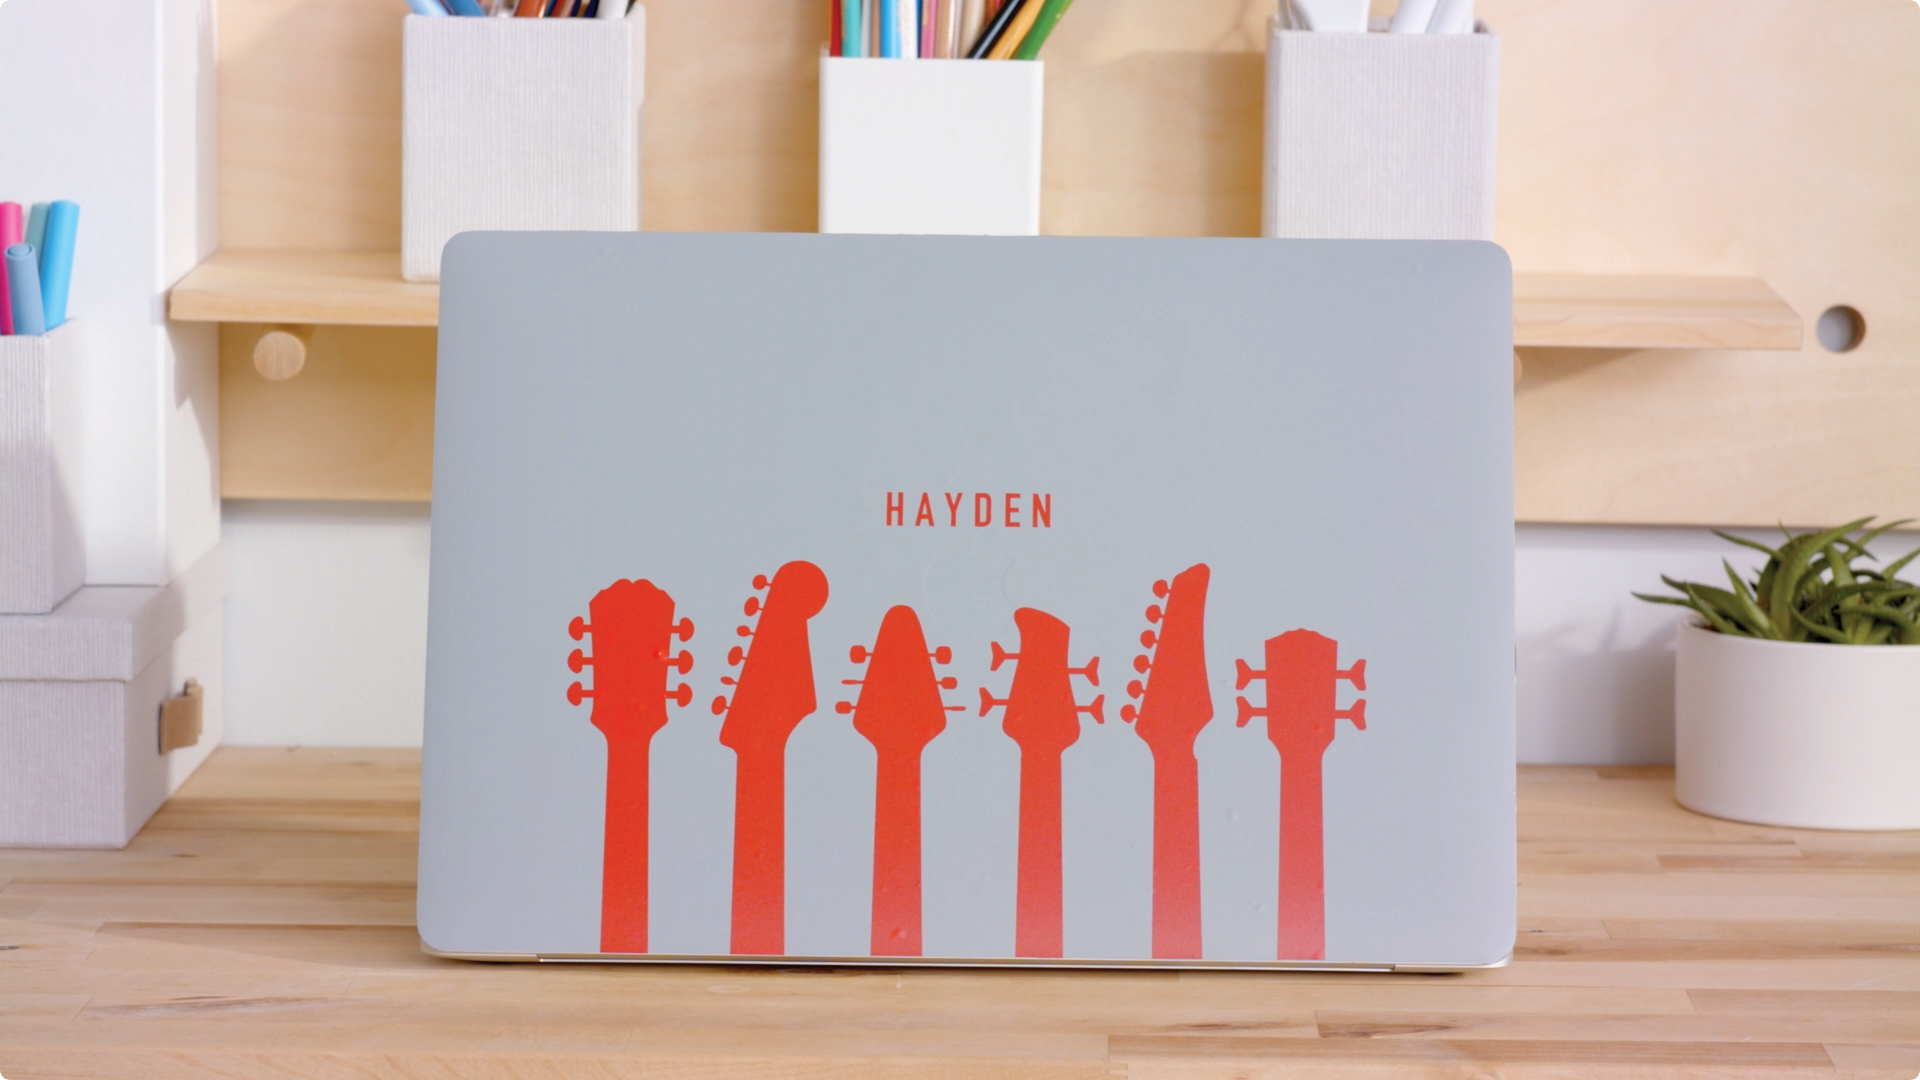 How to make custom decals with Cricut